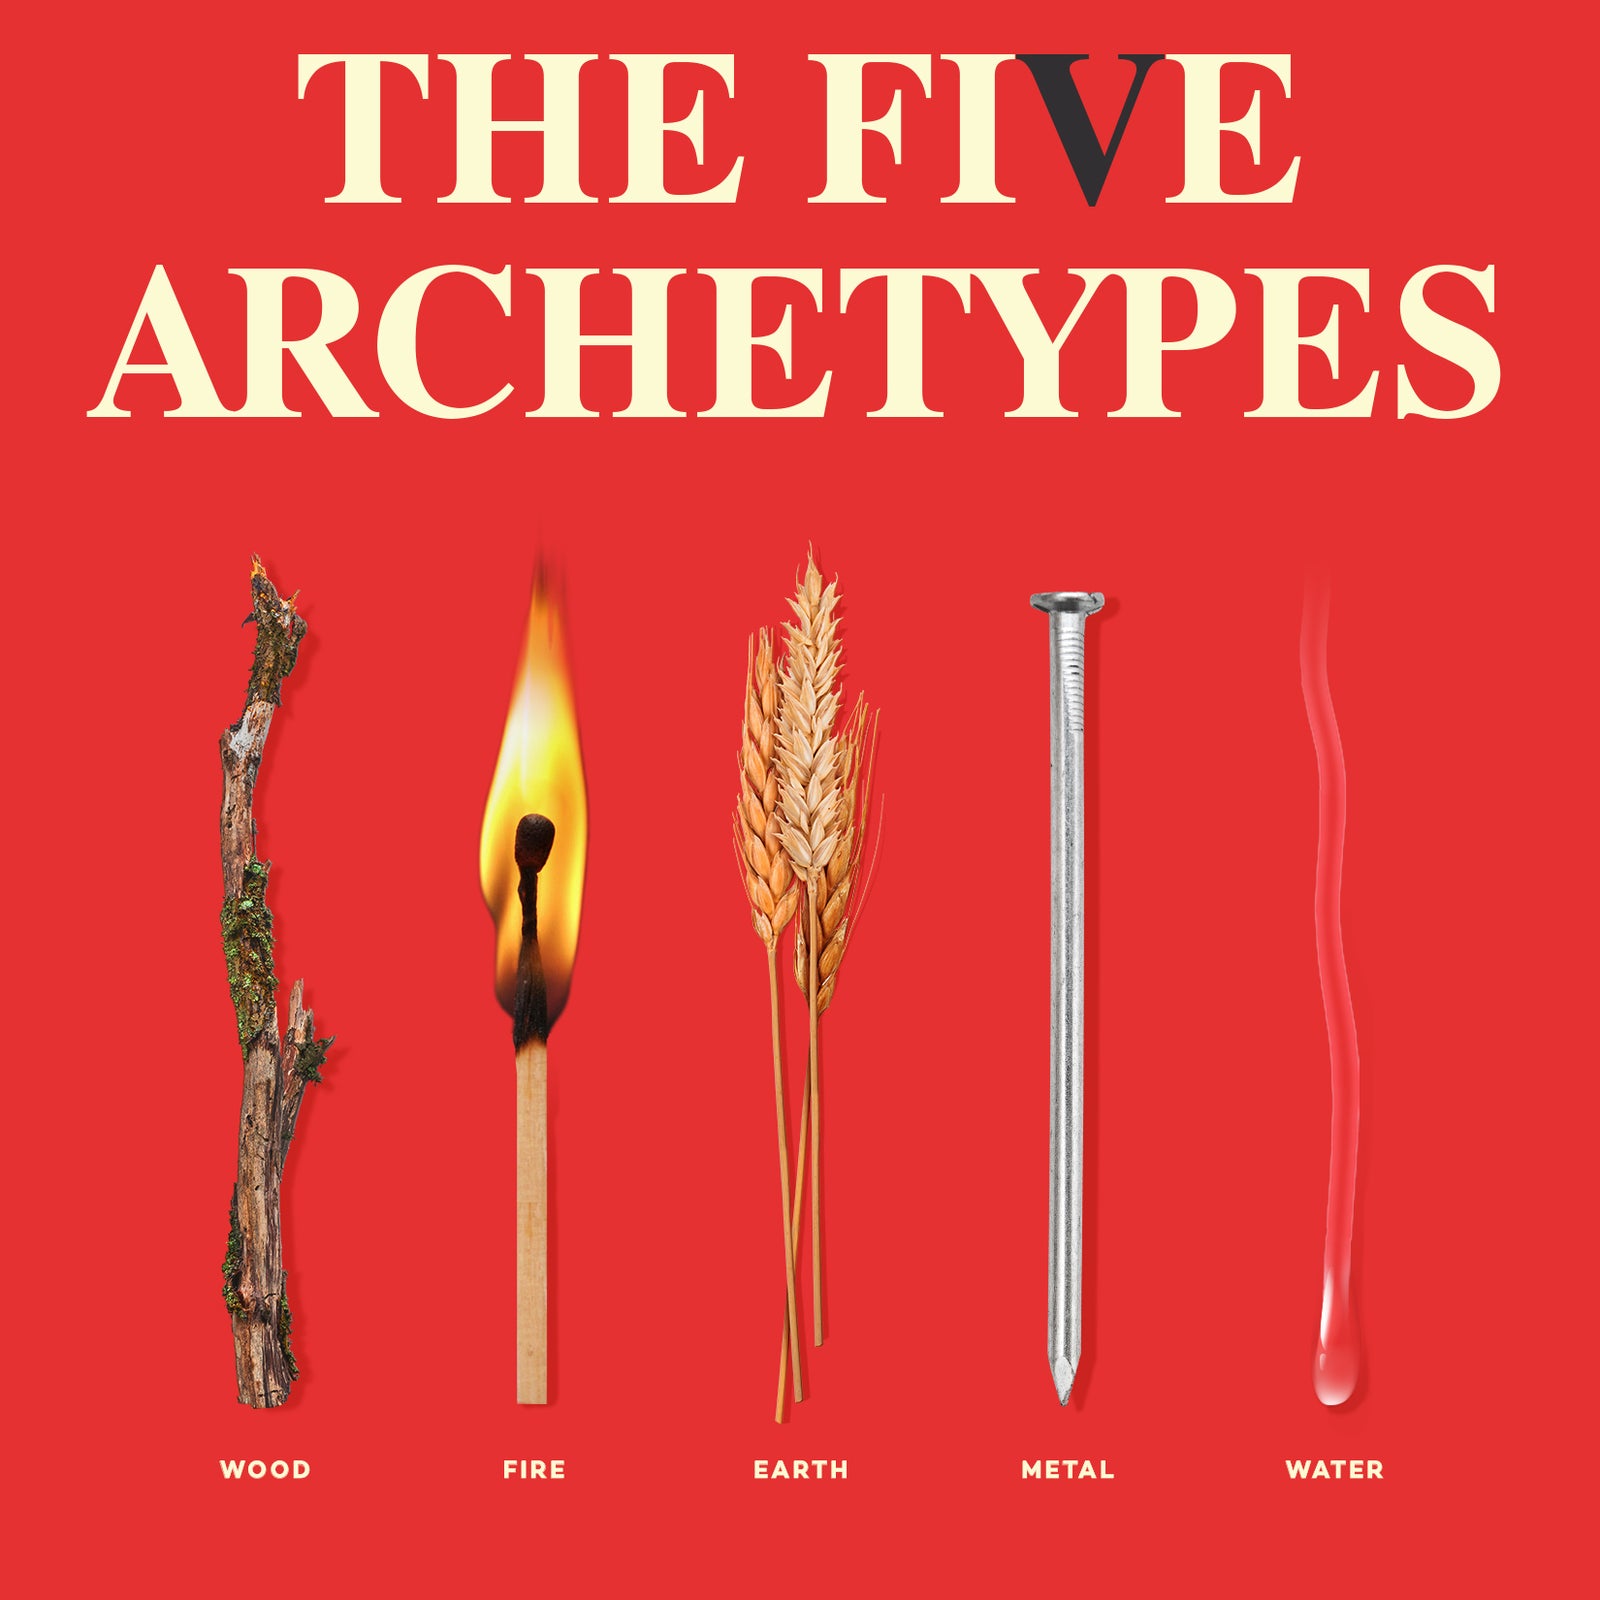 The Five Archetypes: Discover Your True Nature and Transform Your Life and Relationships by Carey Davidson